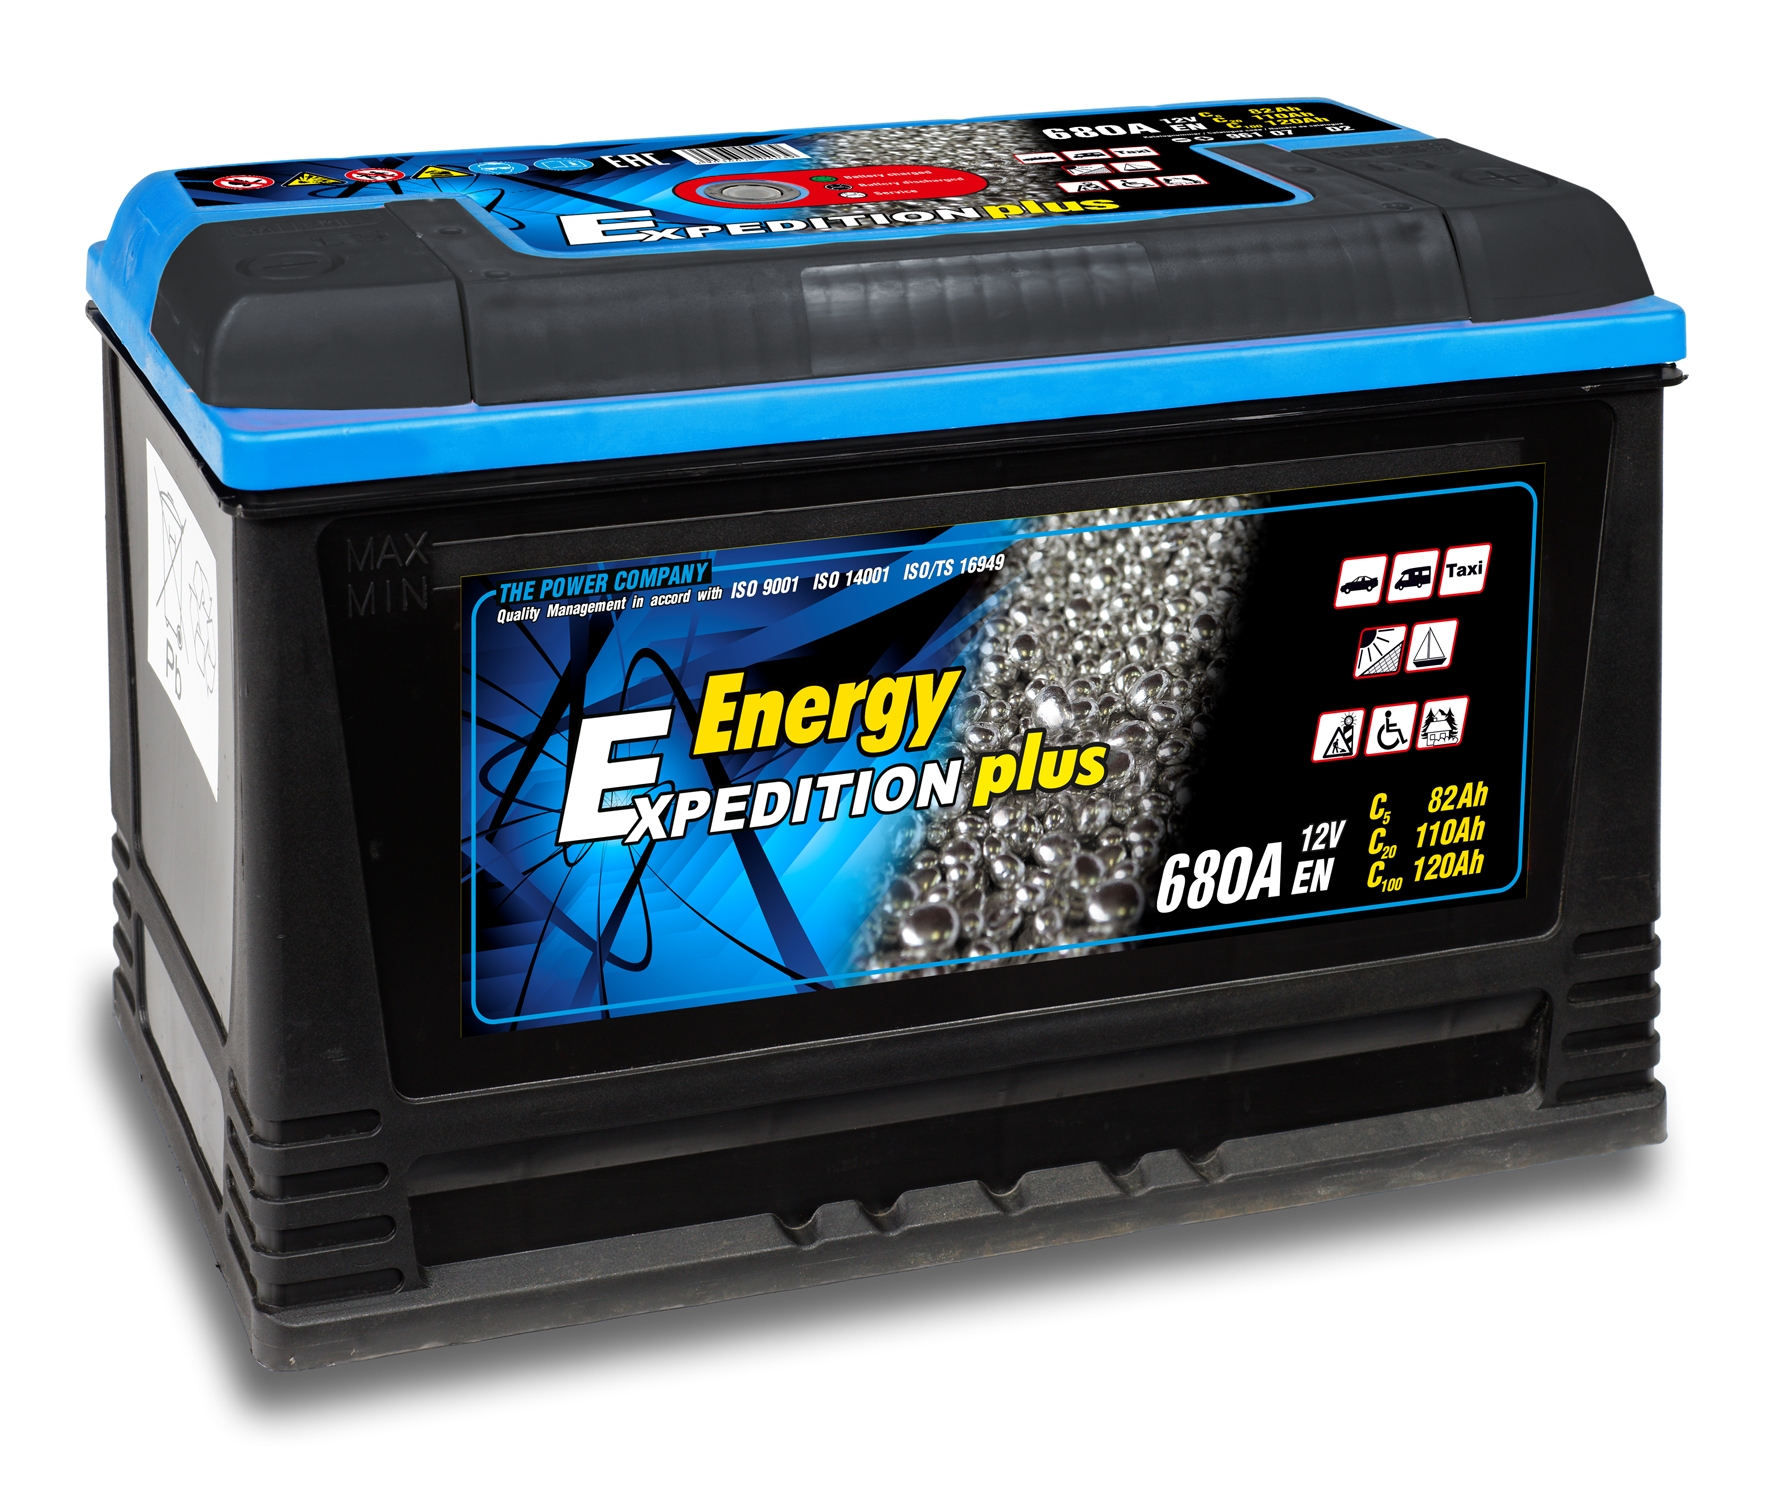 12v 120AH Expedition Plus Semi Traction Leisure Battery